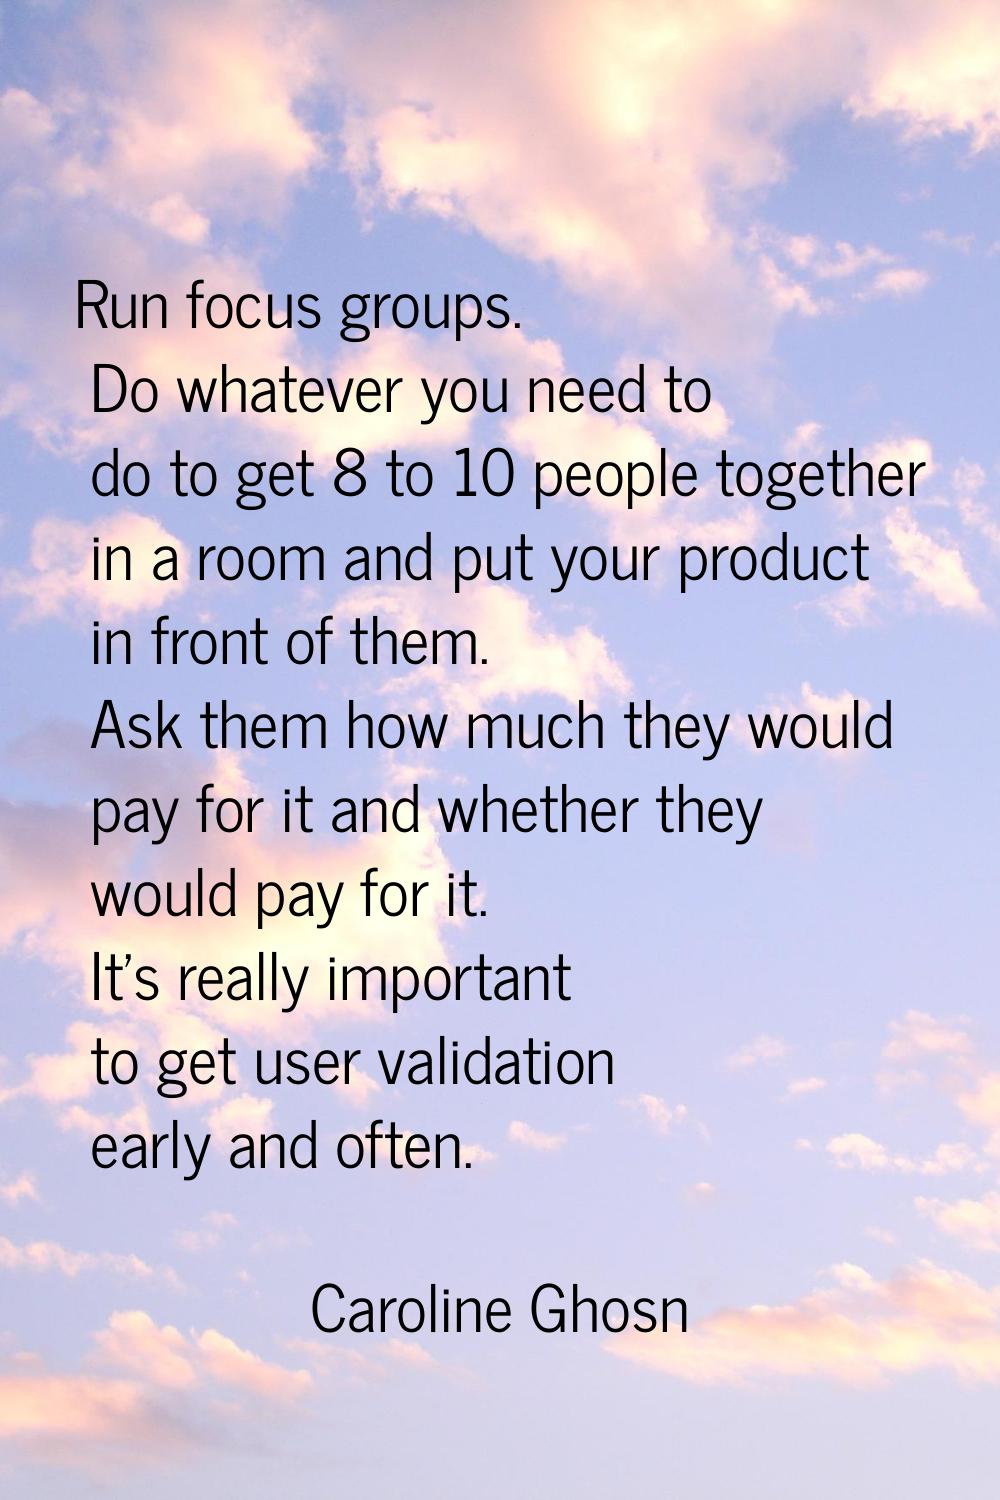 Run focus groups. Do whatever you need to do to get 8 to 10 people together in a room and put your 